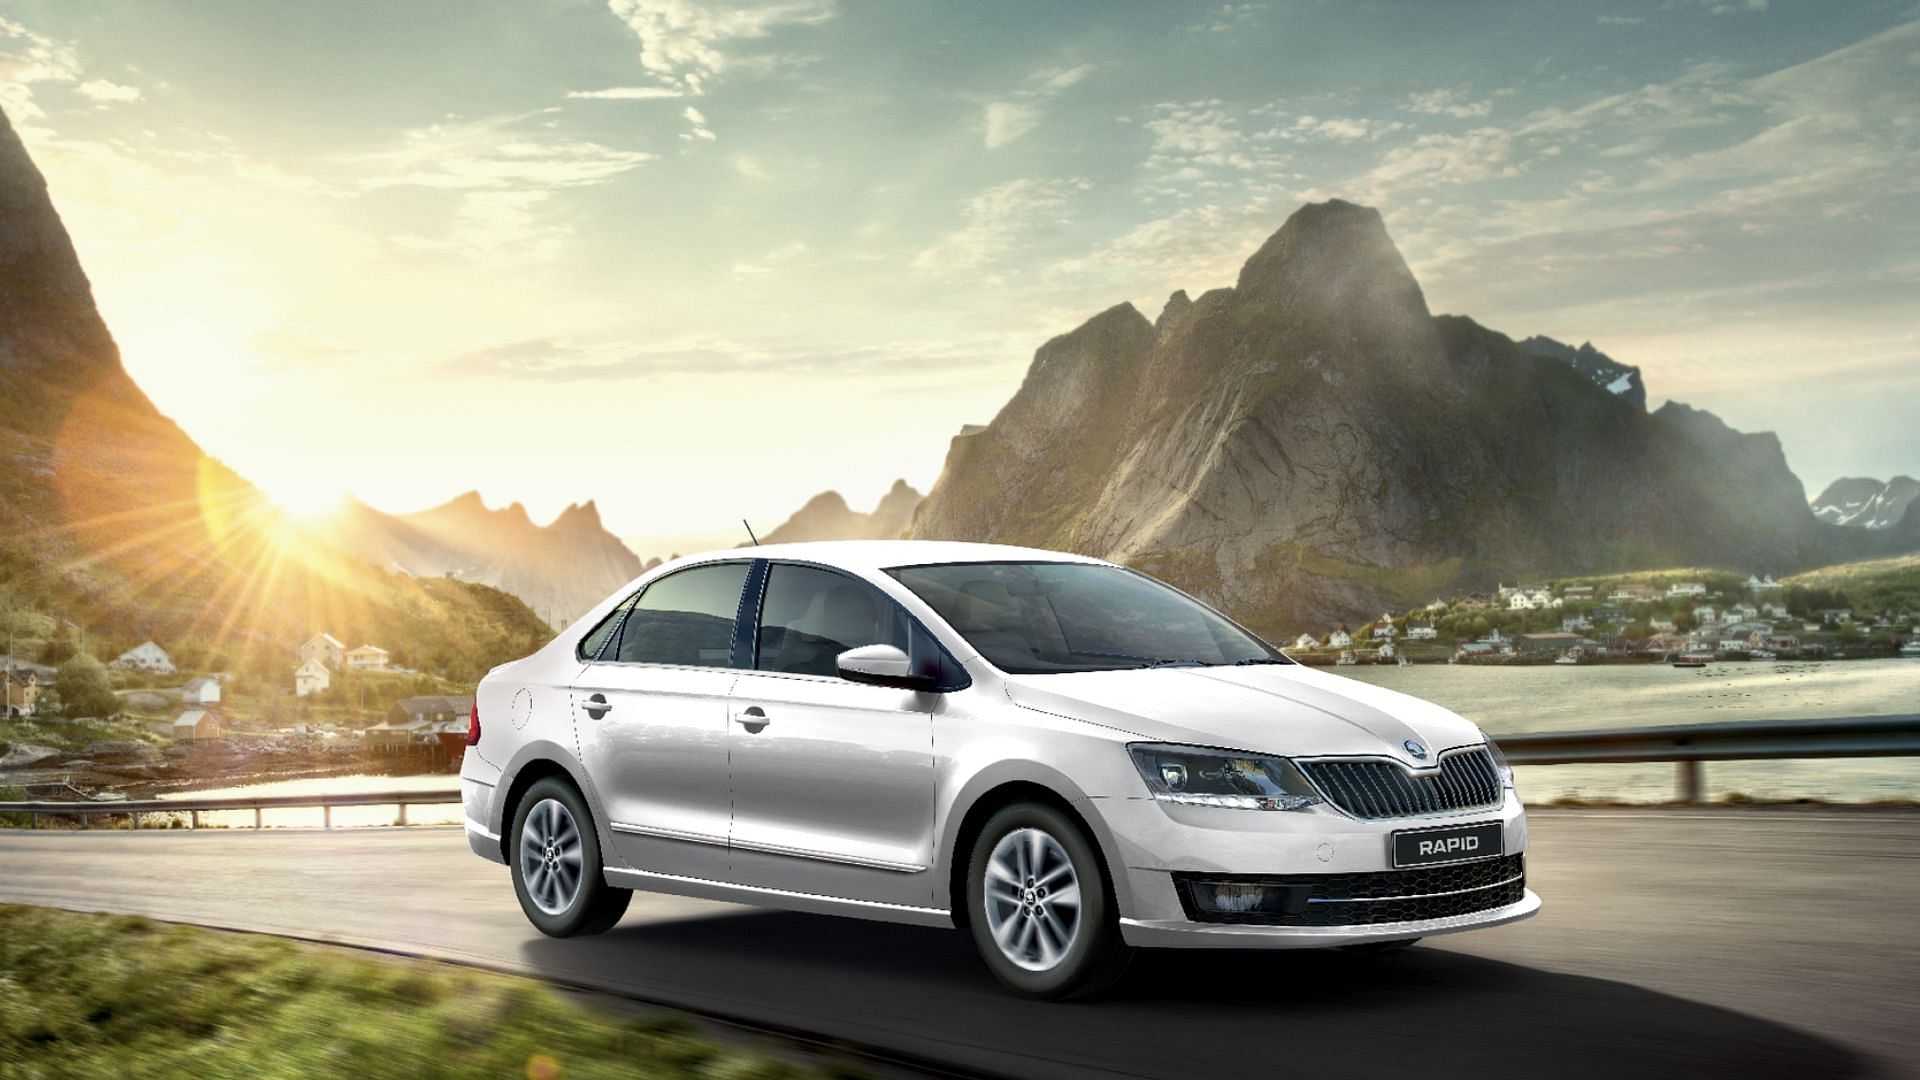 The new ŠKODA RAPID 1.0 TSI is loaded with top-notch features